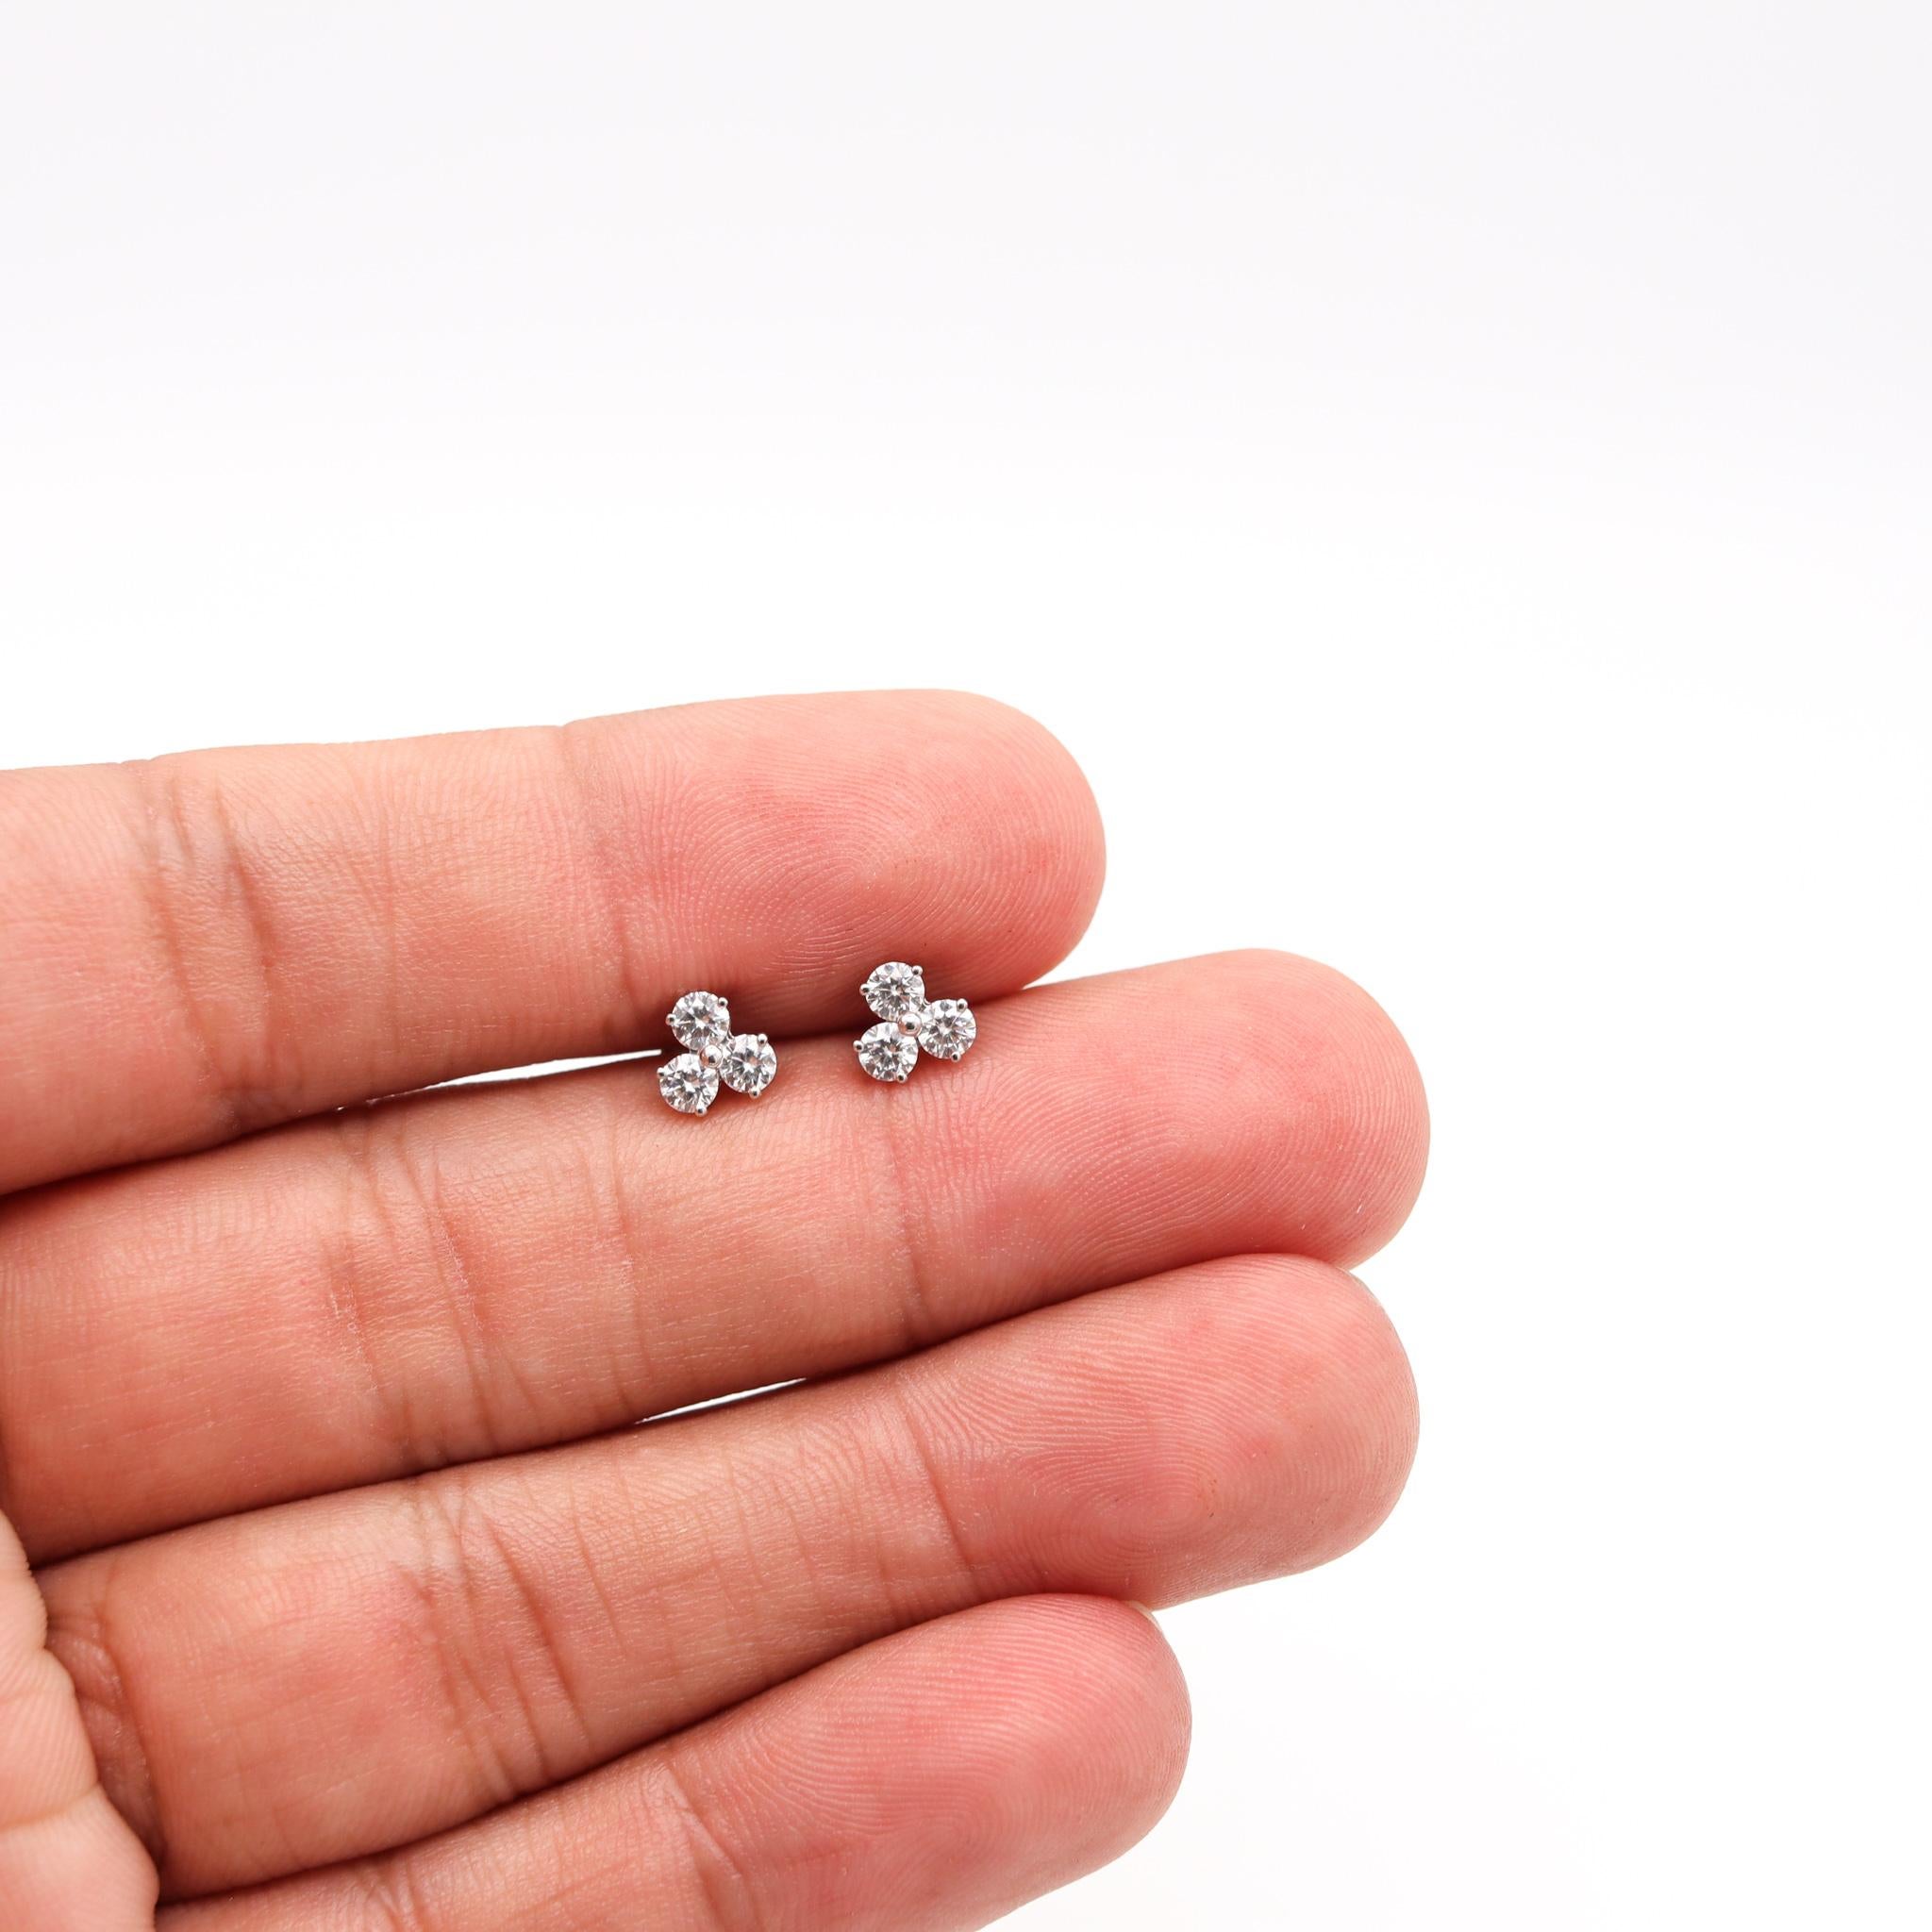 Tiffany & Co. Three Stones Earrings Studs In Solid Platinum With 6 VVS Diamonds 1